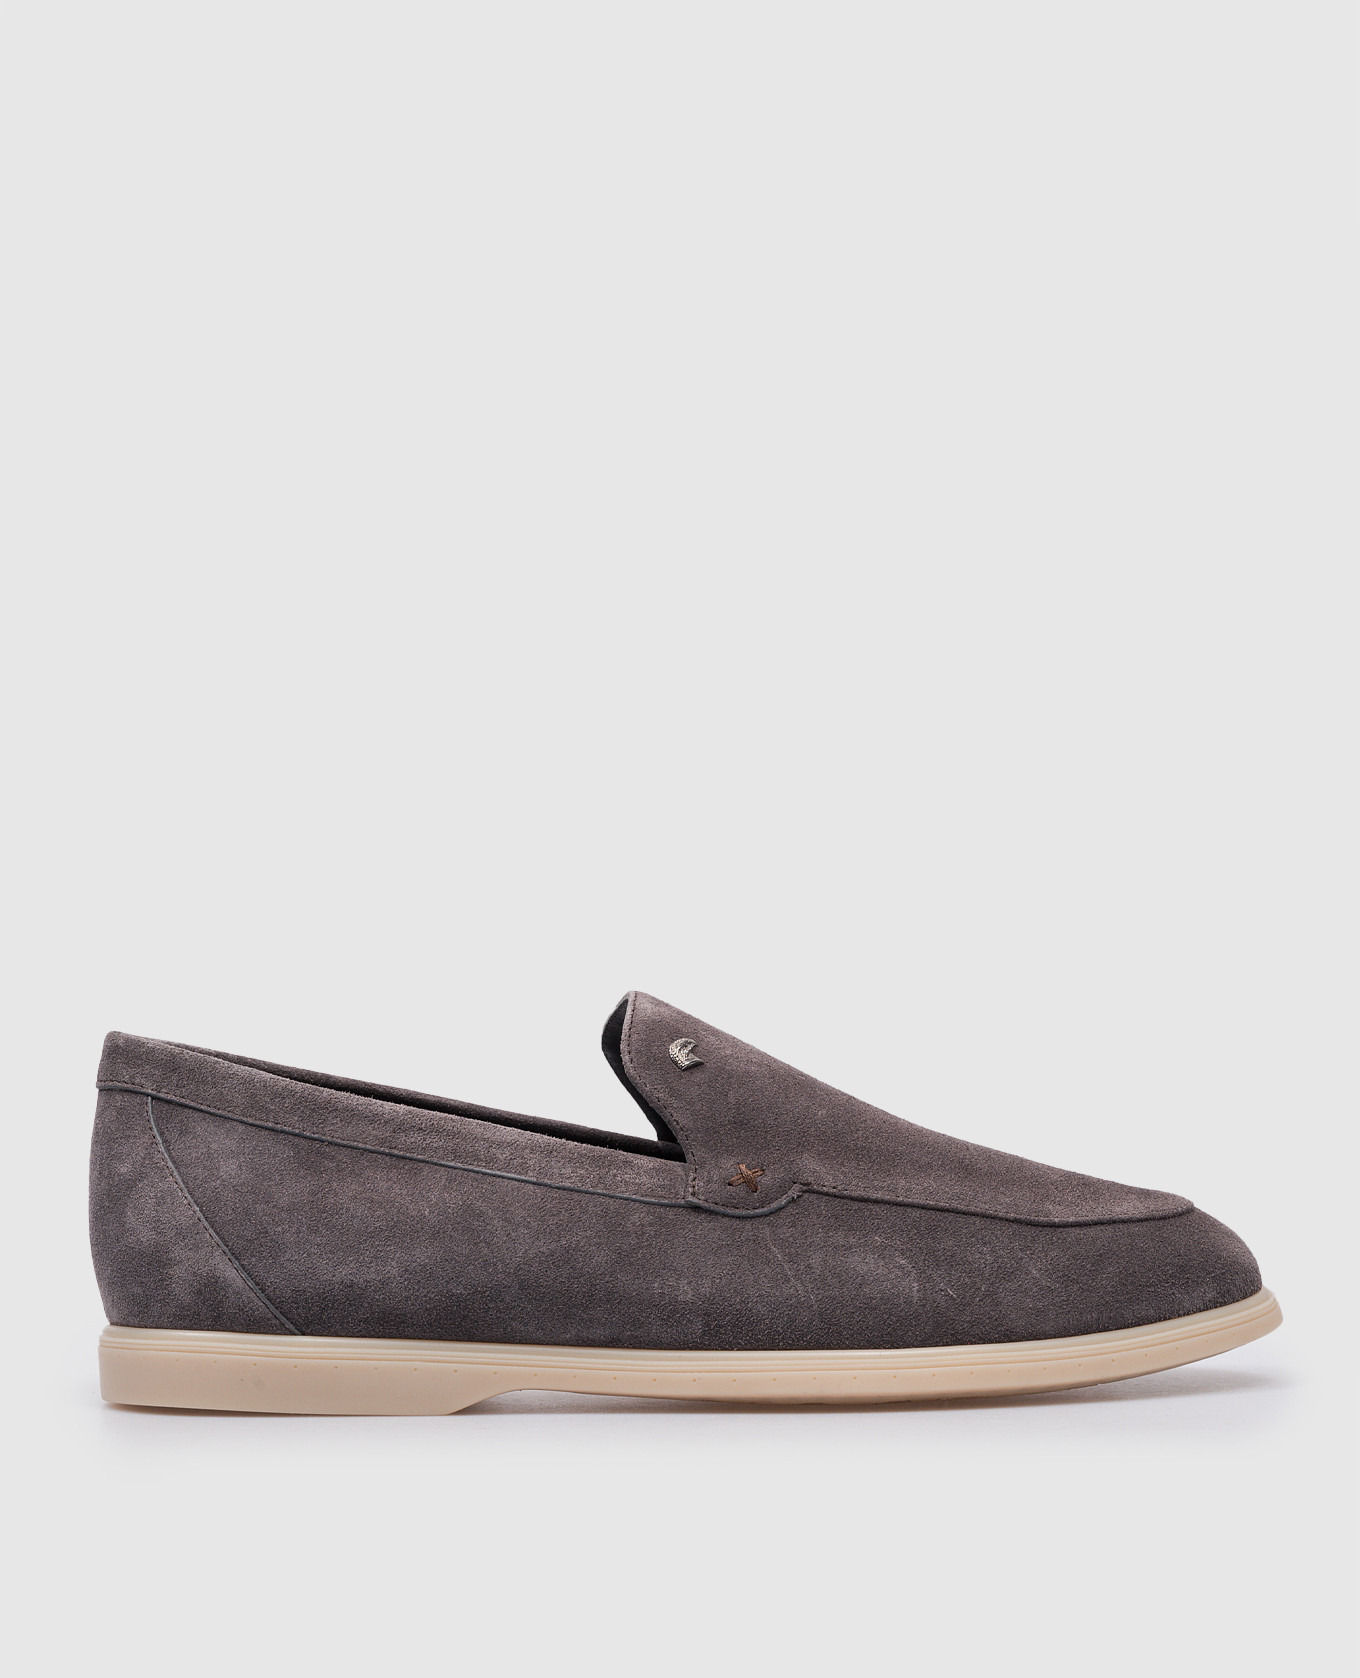 Gray suede loafers with metallic logo